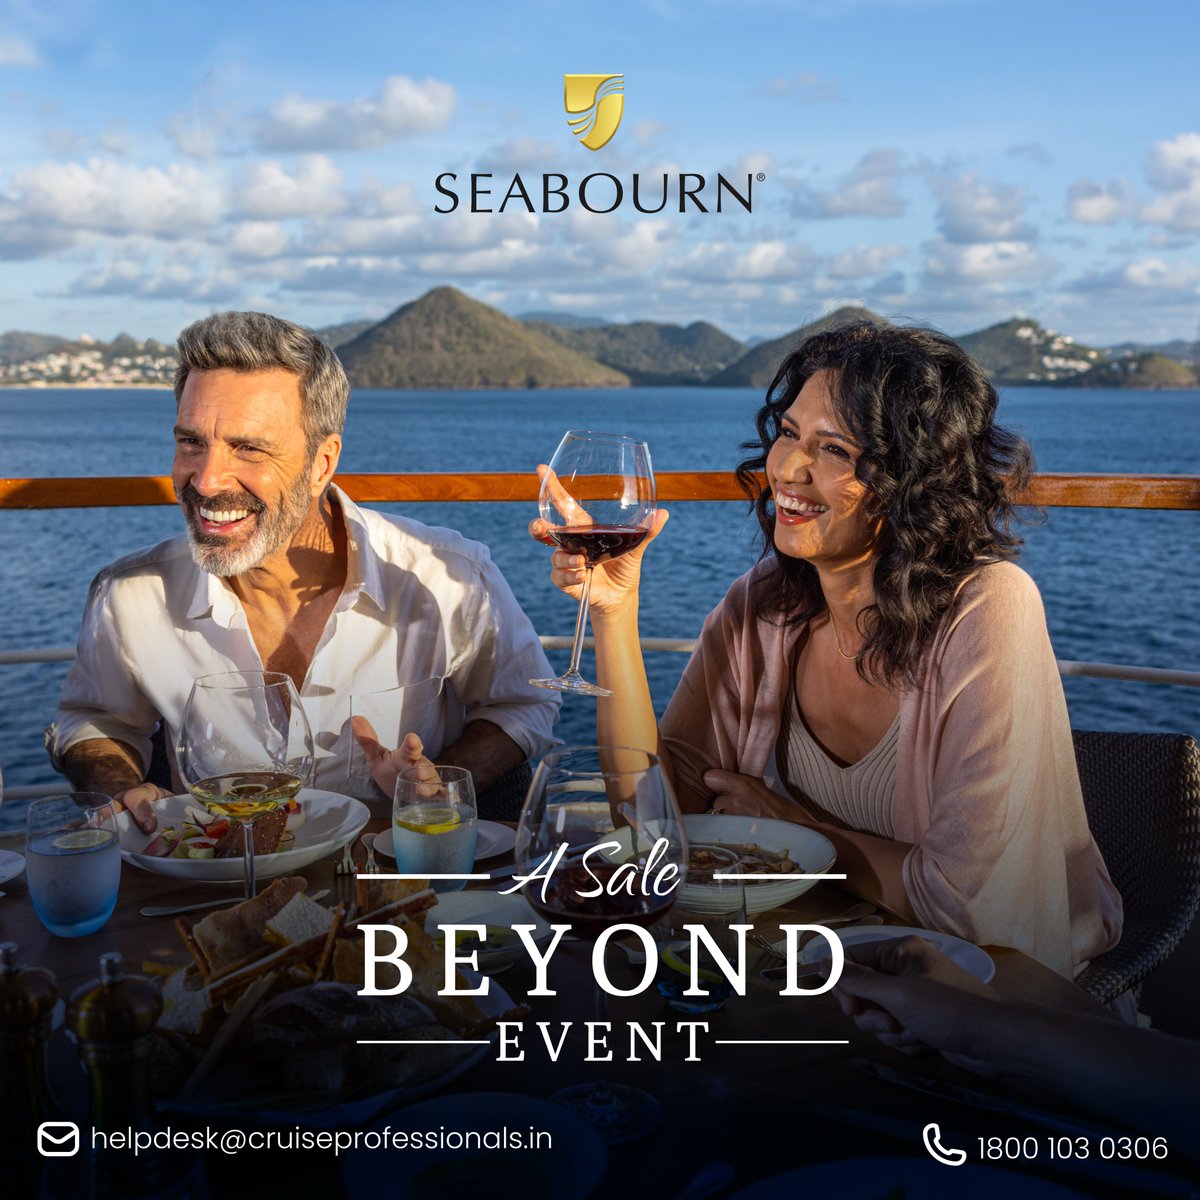 From the moment you arrive, everything about your trip just flows. Your entire experience - beautifully choreographed and seamlessly carried out, so you can relax and truly be on vacation.
#seabourn #cruiseprofessionals #offer #deal #seabournmoments #seastheday